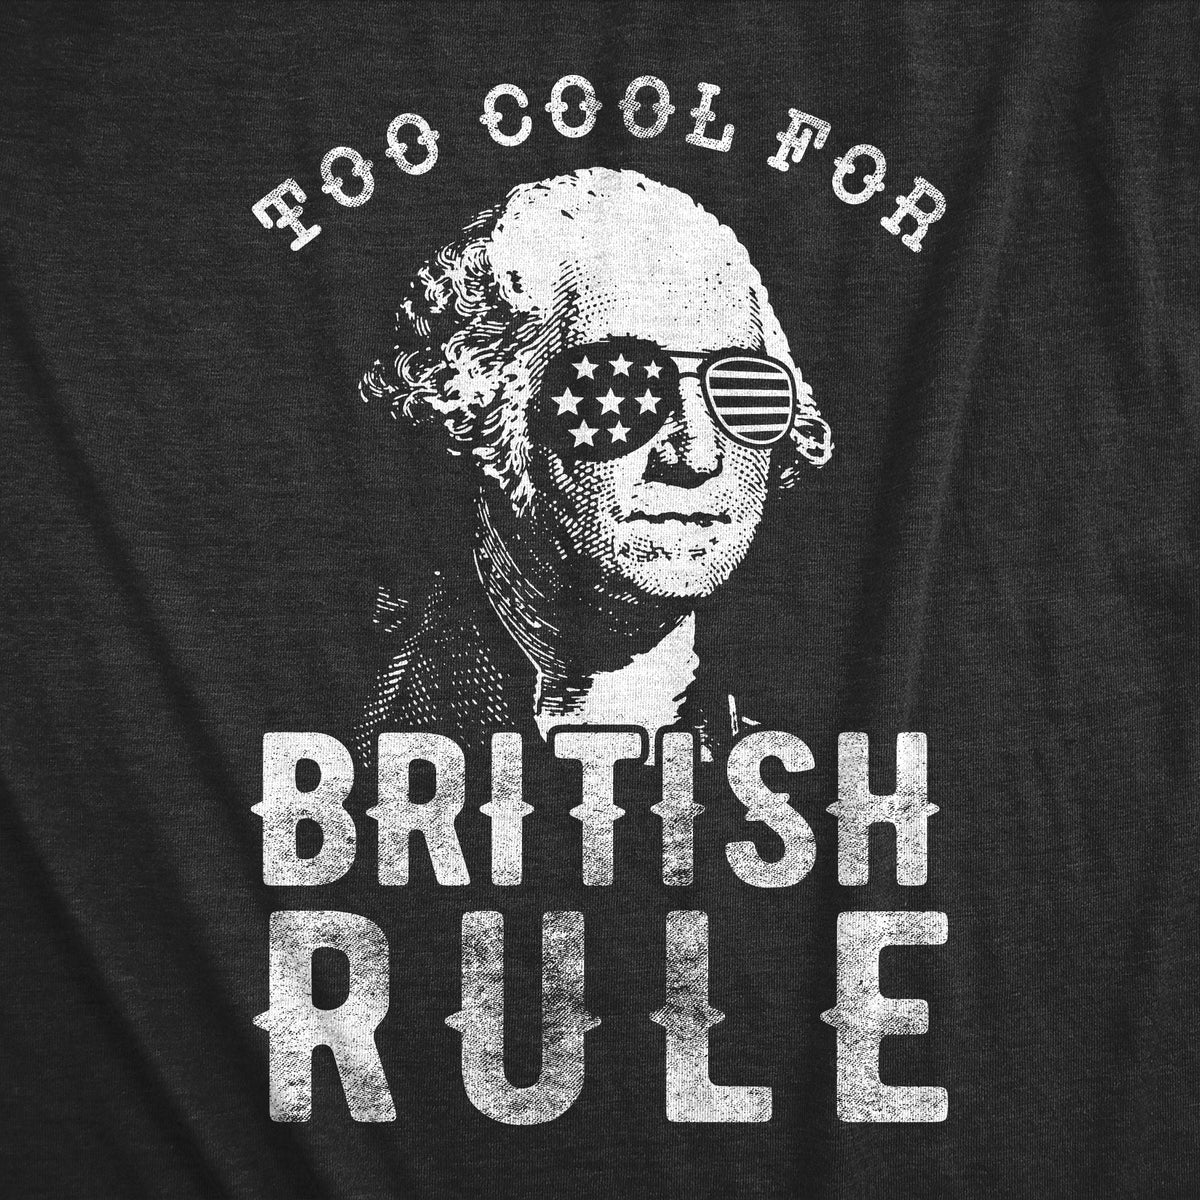 Too Cool For British Rule Men&#39;s T Shirt